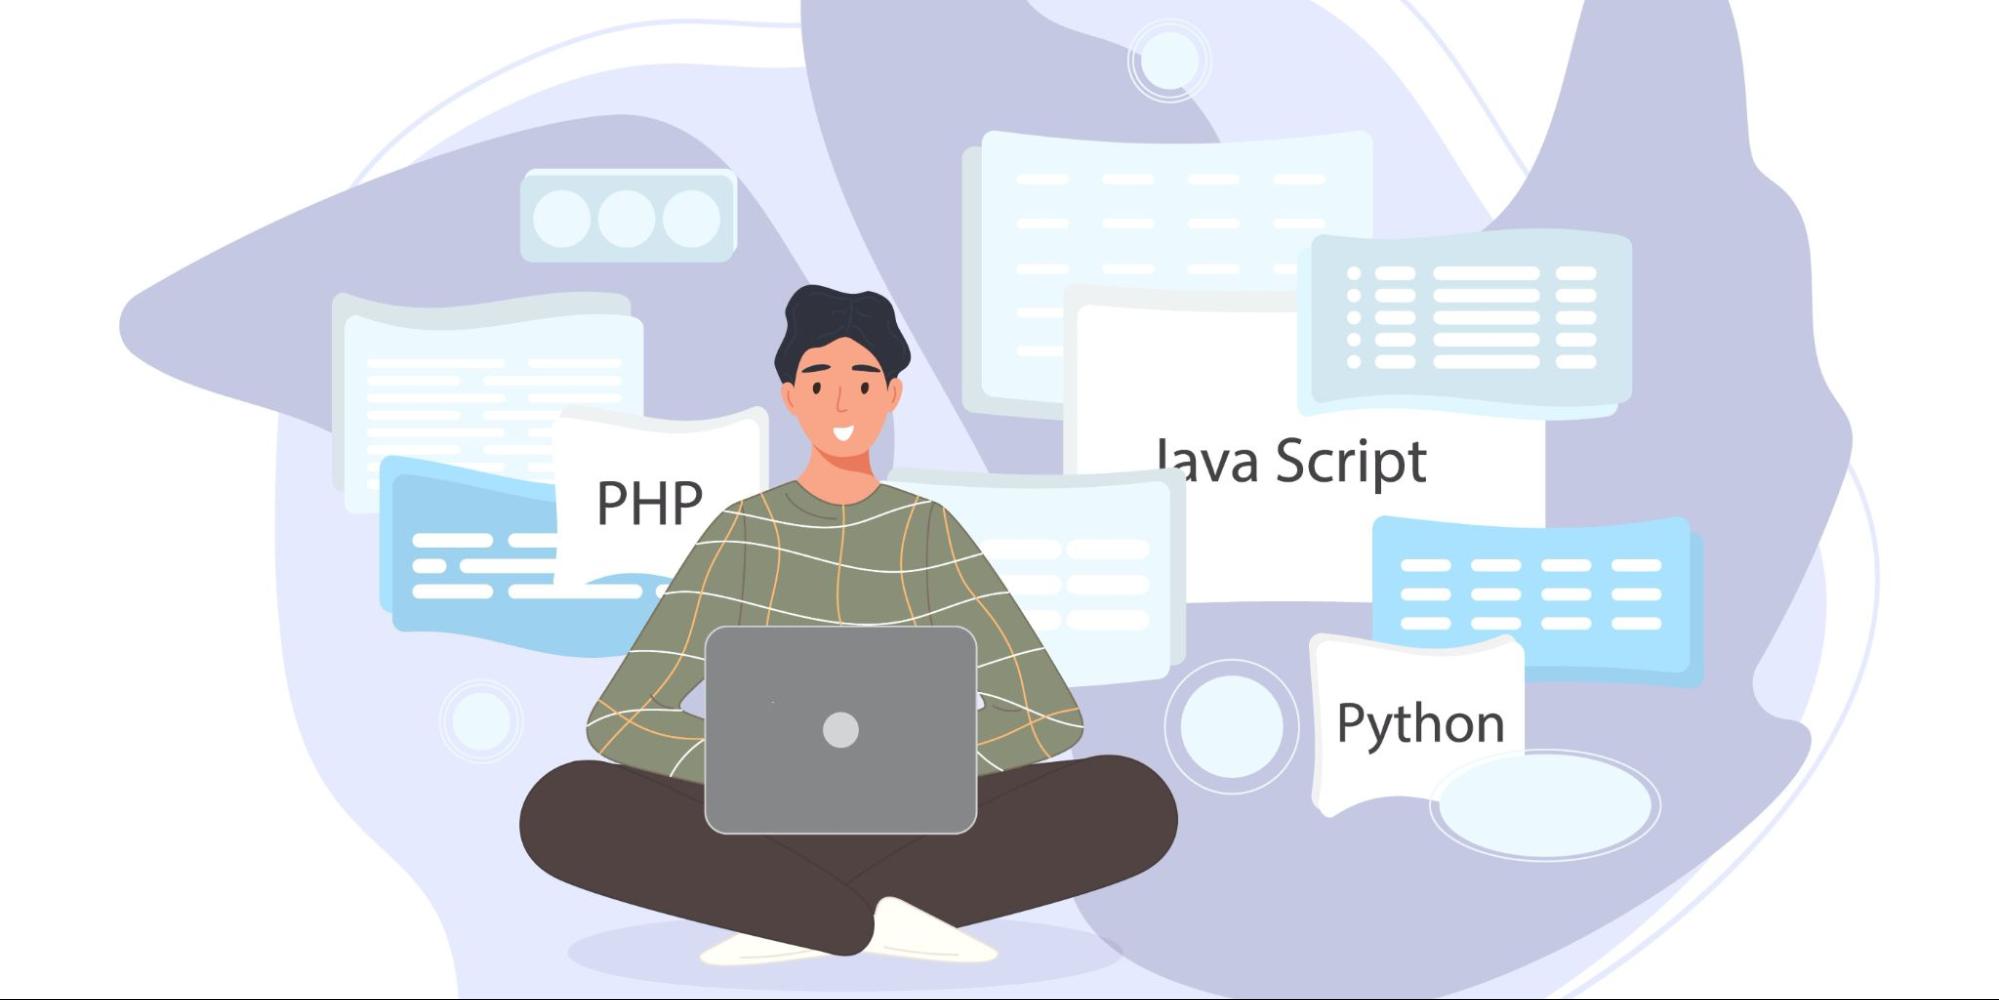 HTML developers should acquire technical proficiency and skills